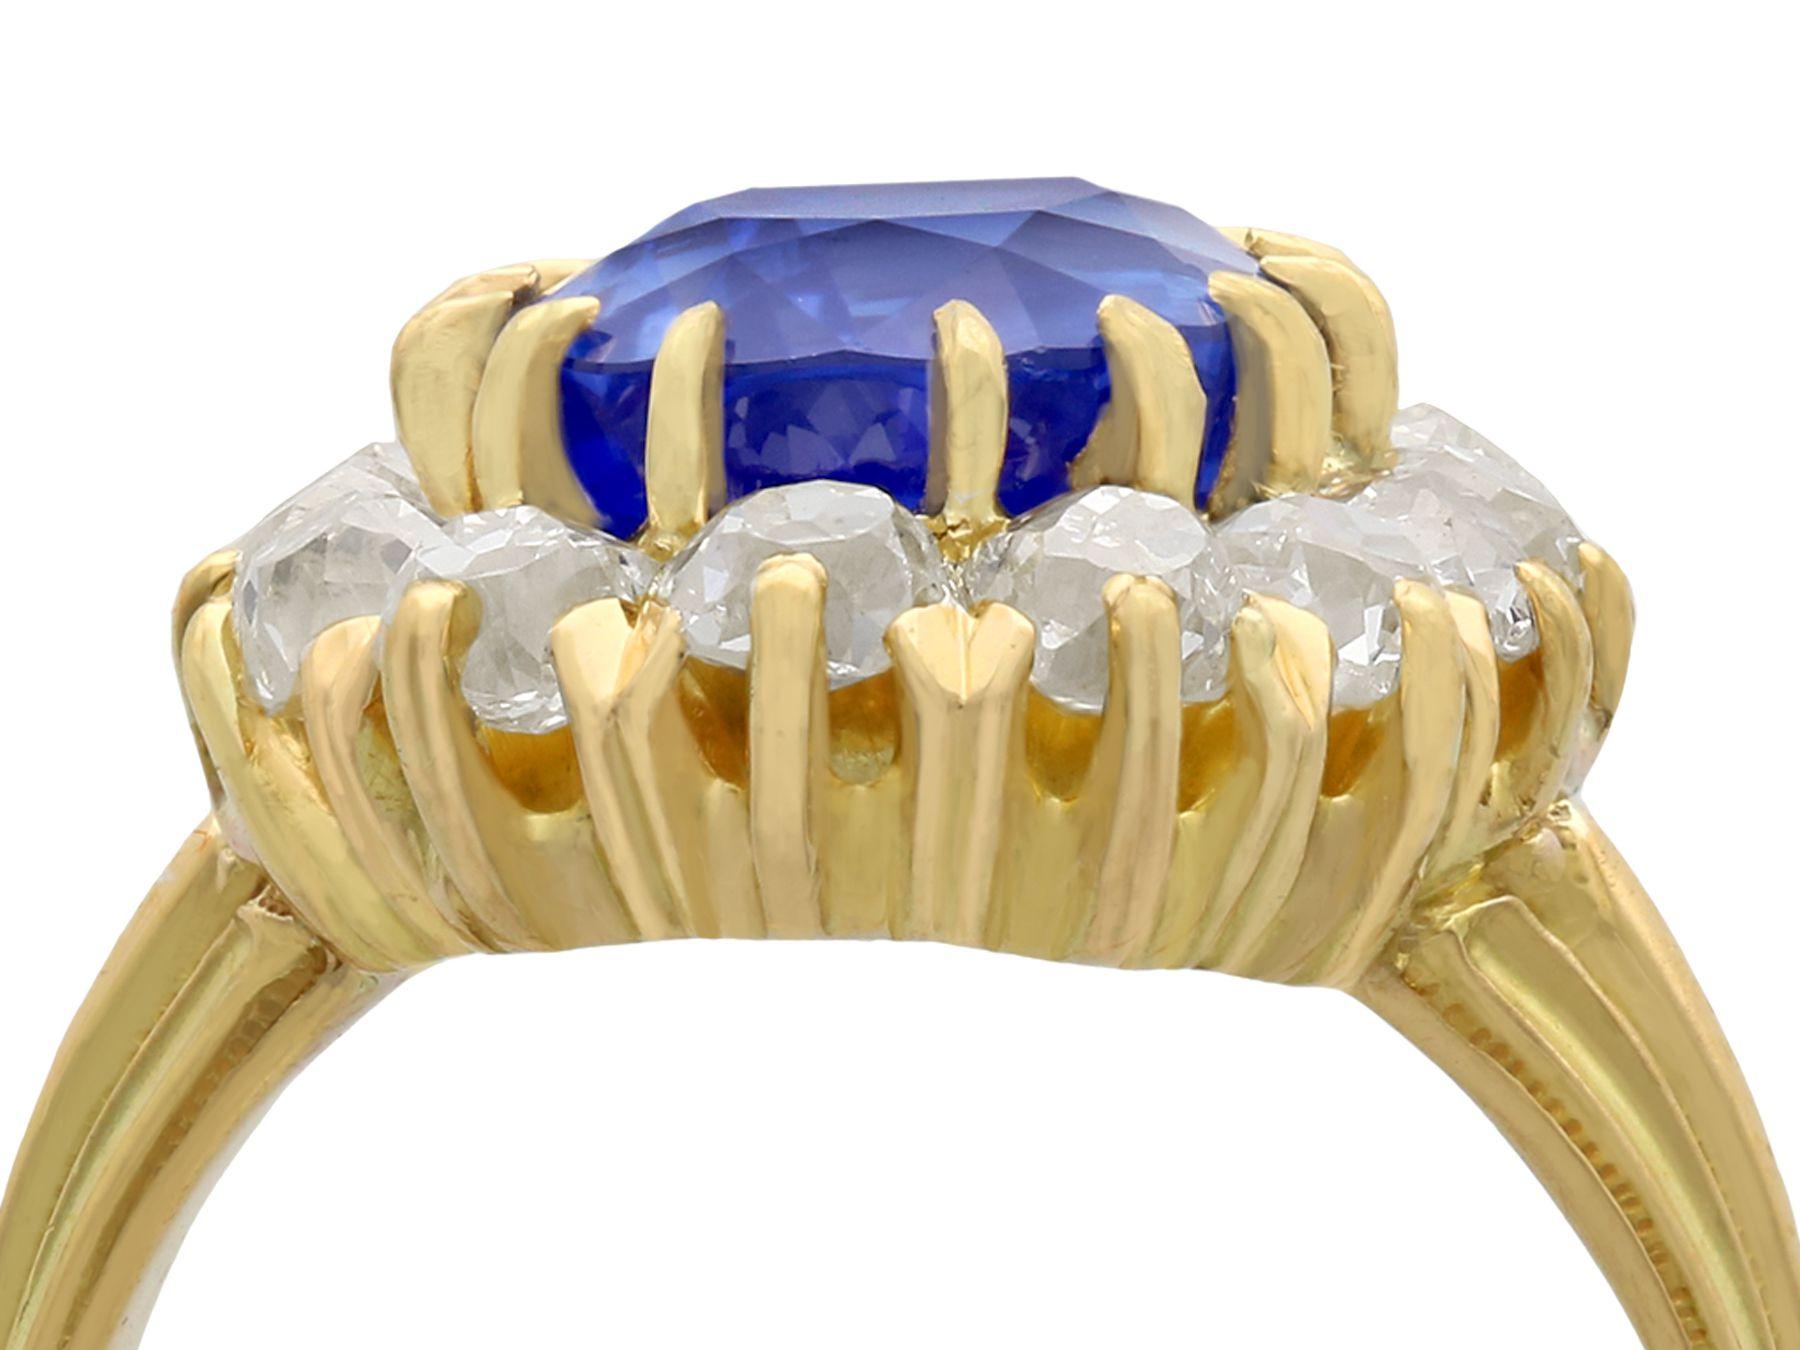 A stunning antique French 4.81 carat sapphire and 1.26 carat diamond, 18 karat yellow gold cluster ring; part of our diverse antique jewelry and estate jewelry collections.

This stunning, fine and impressive antique sapphire and diamond ring has